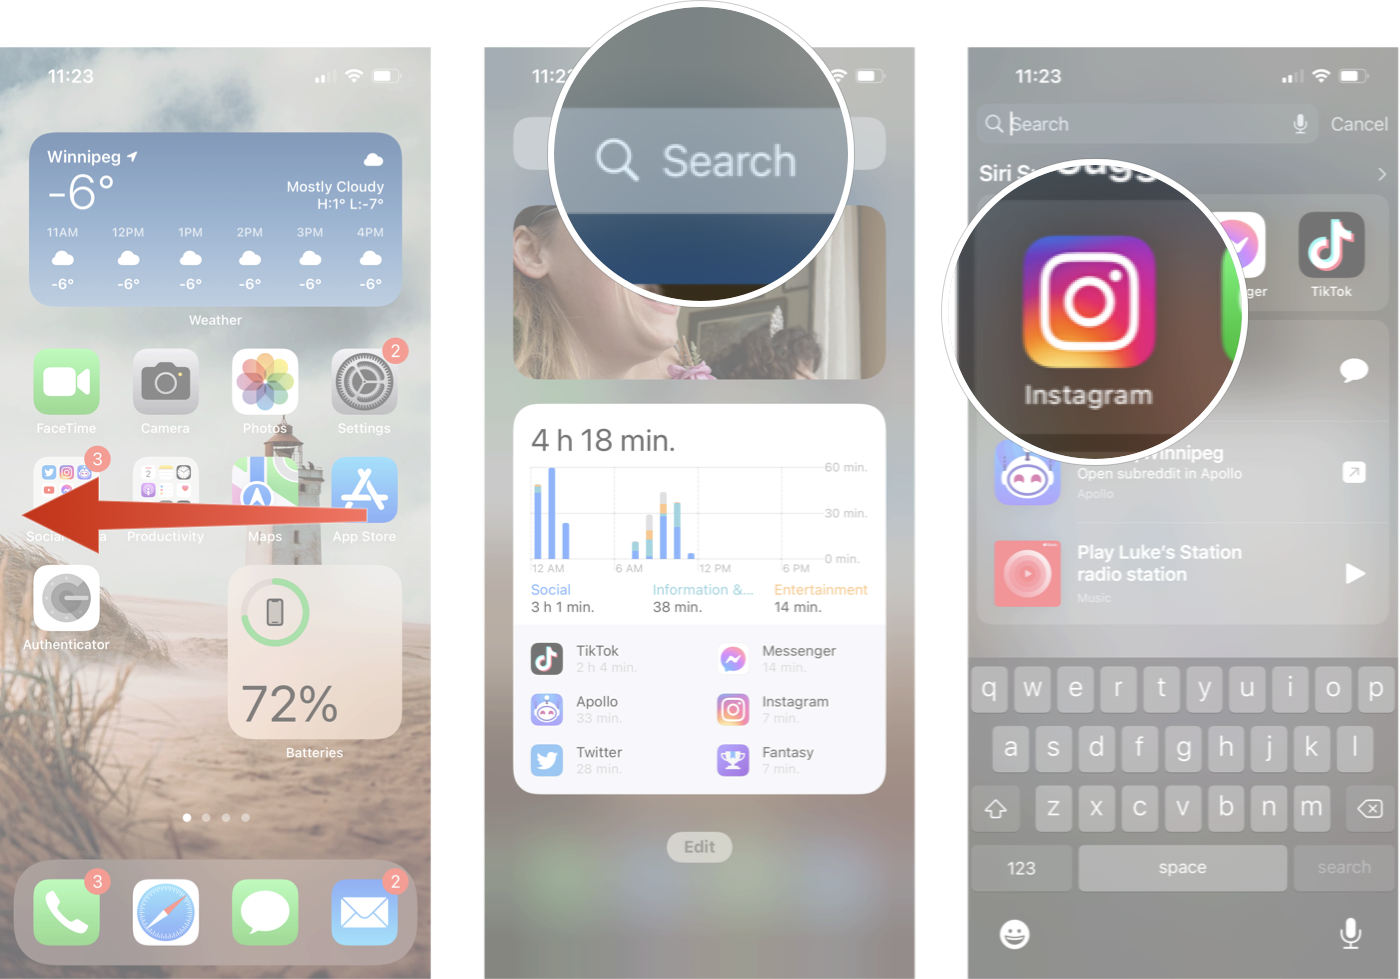 How To Use Search On Face ID: Swipe right on our Home screen, tap search, enter your search term, tap the result.